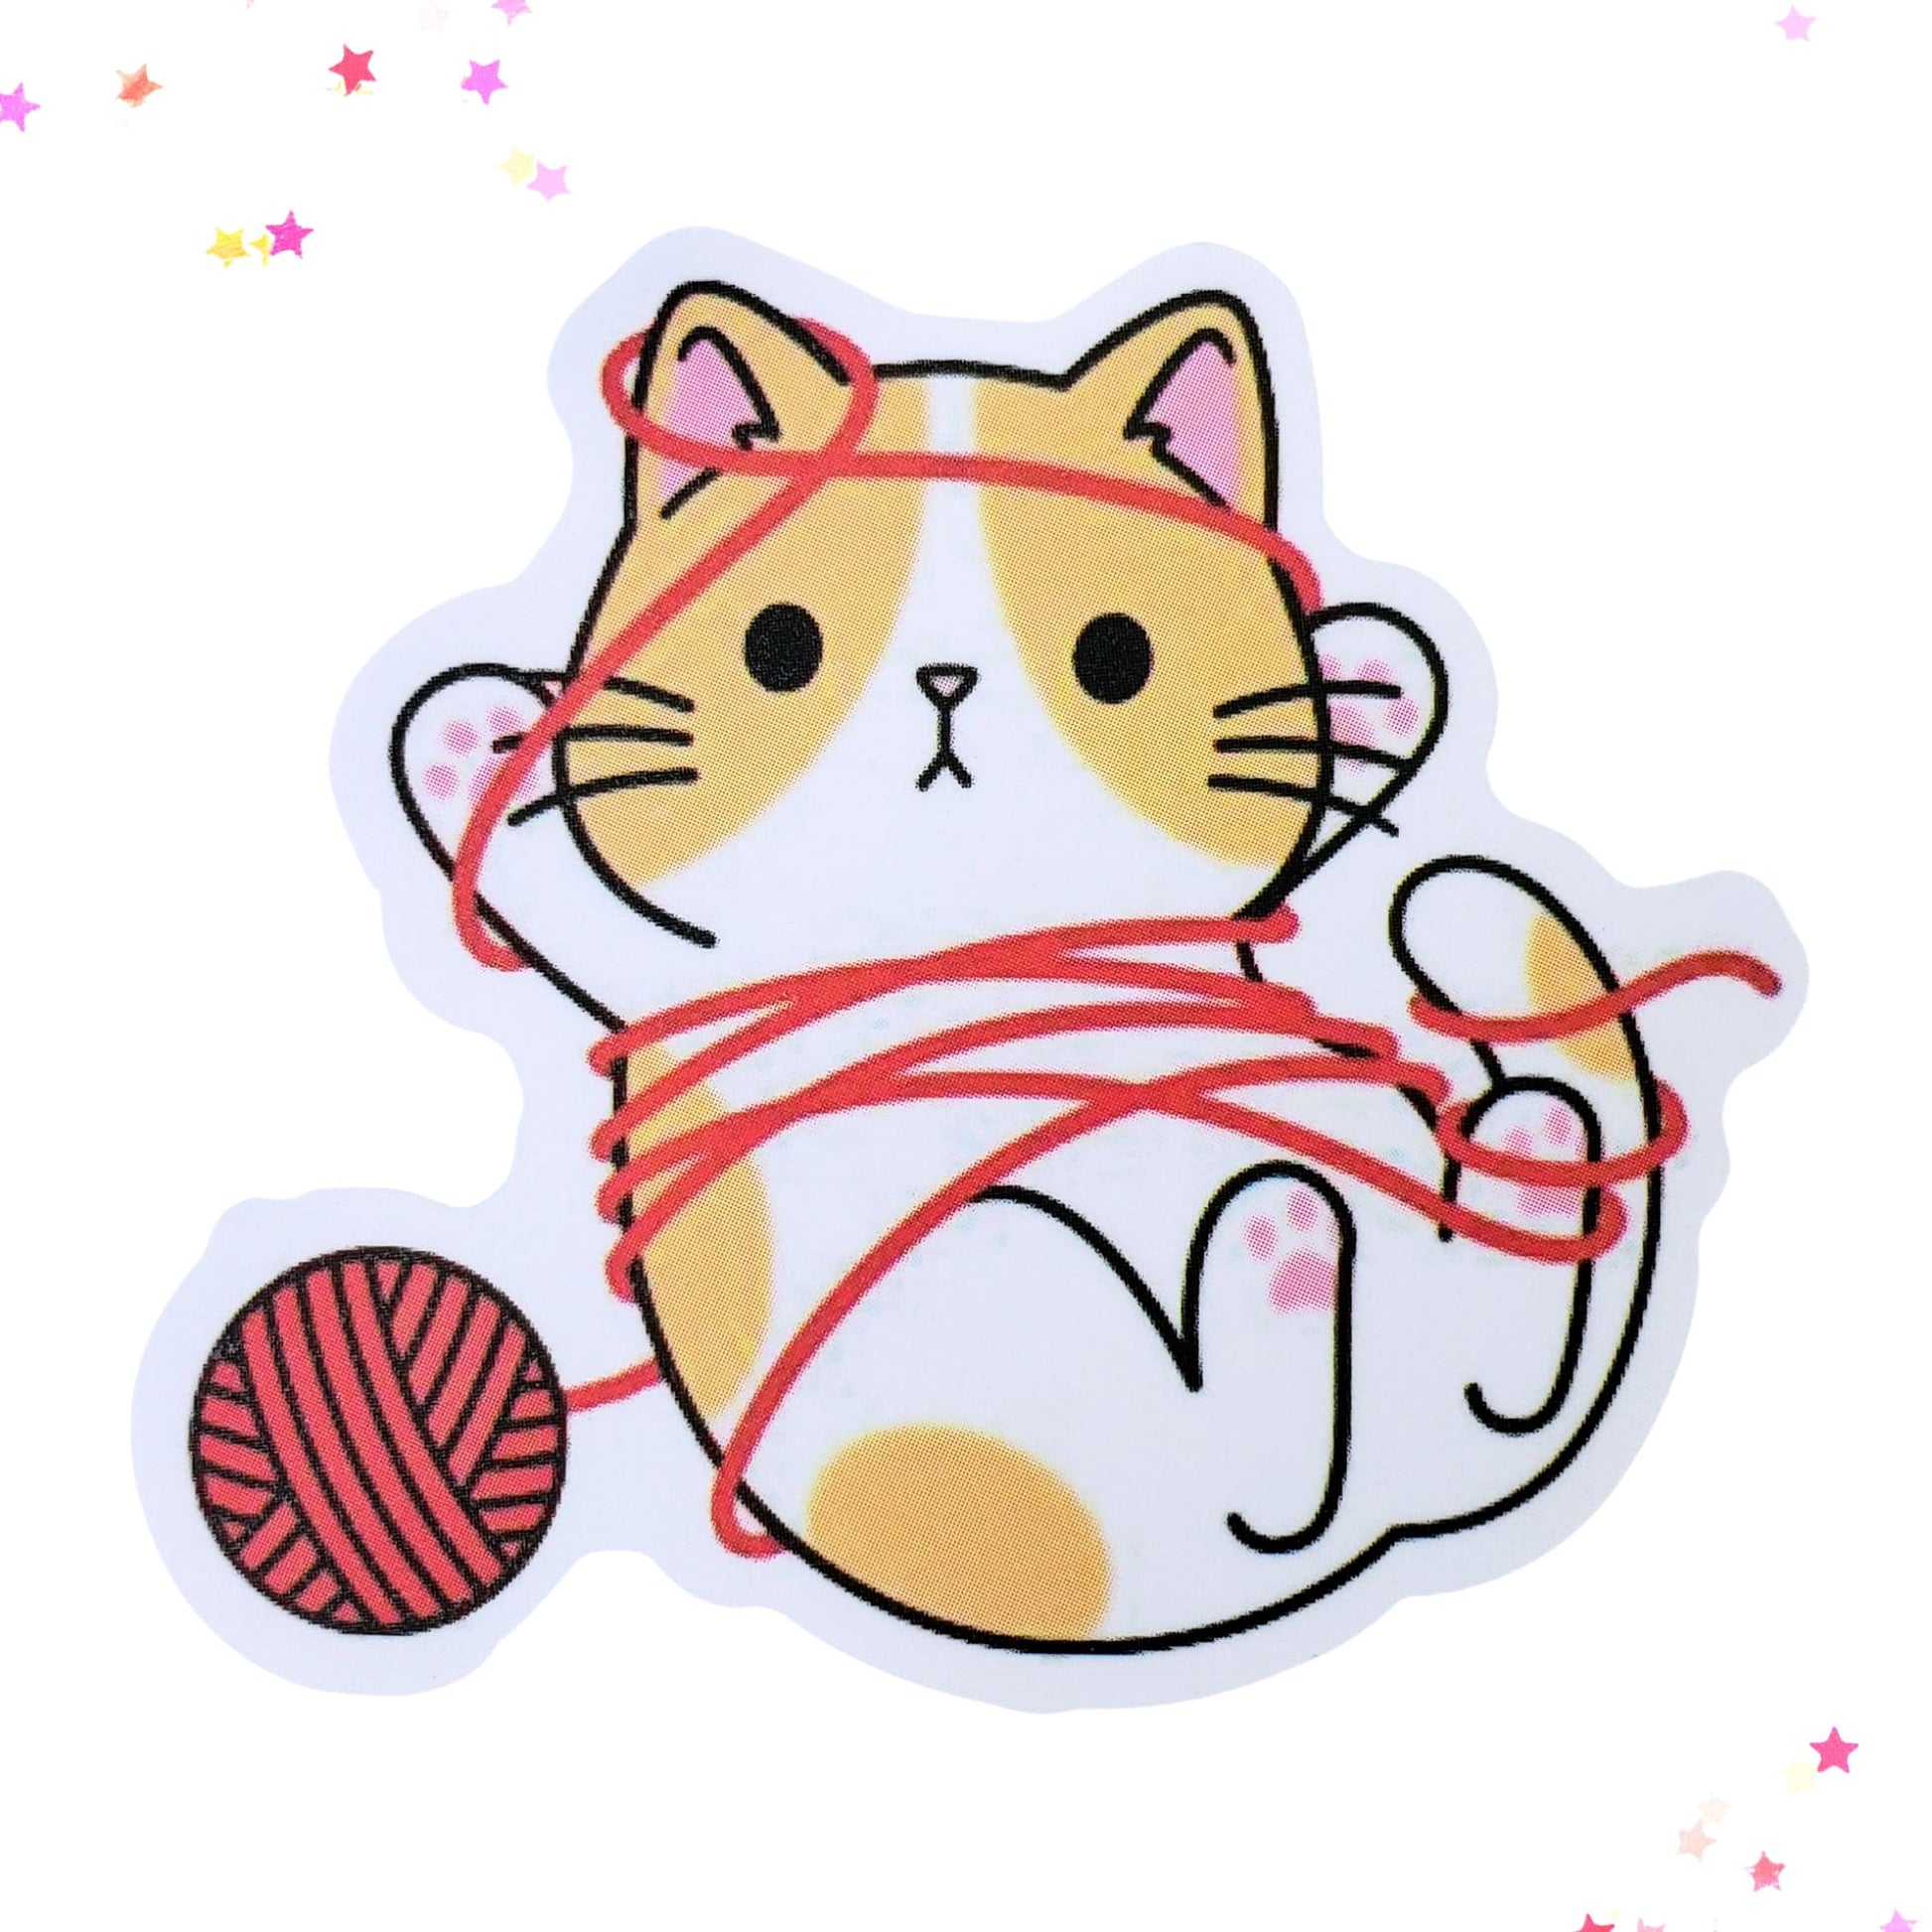 Caught Kitty Waterproof Sticker from Confetti Kitty, Only 1.00